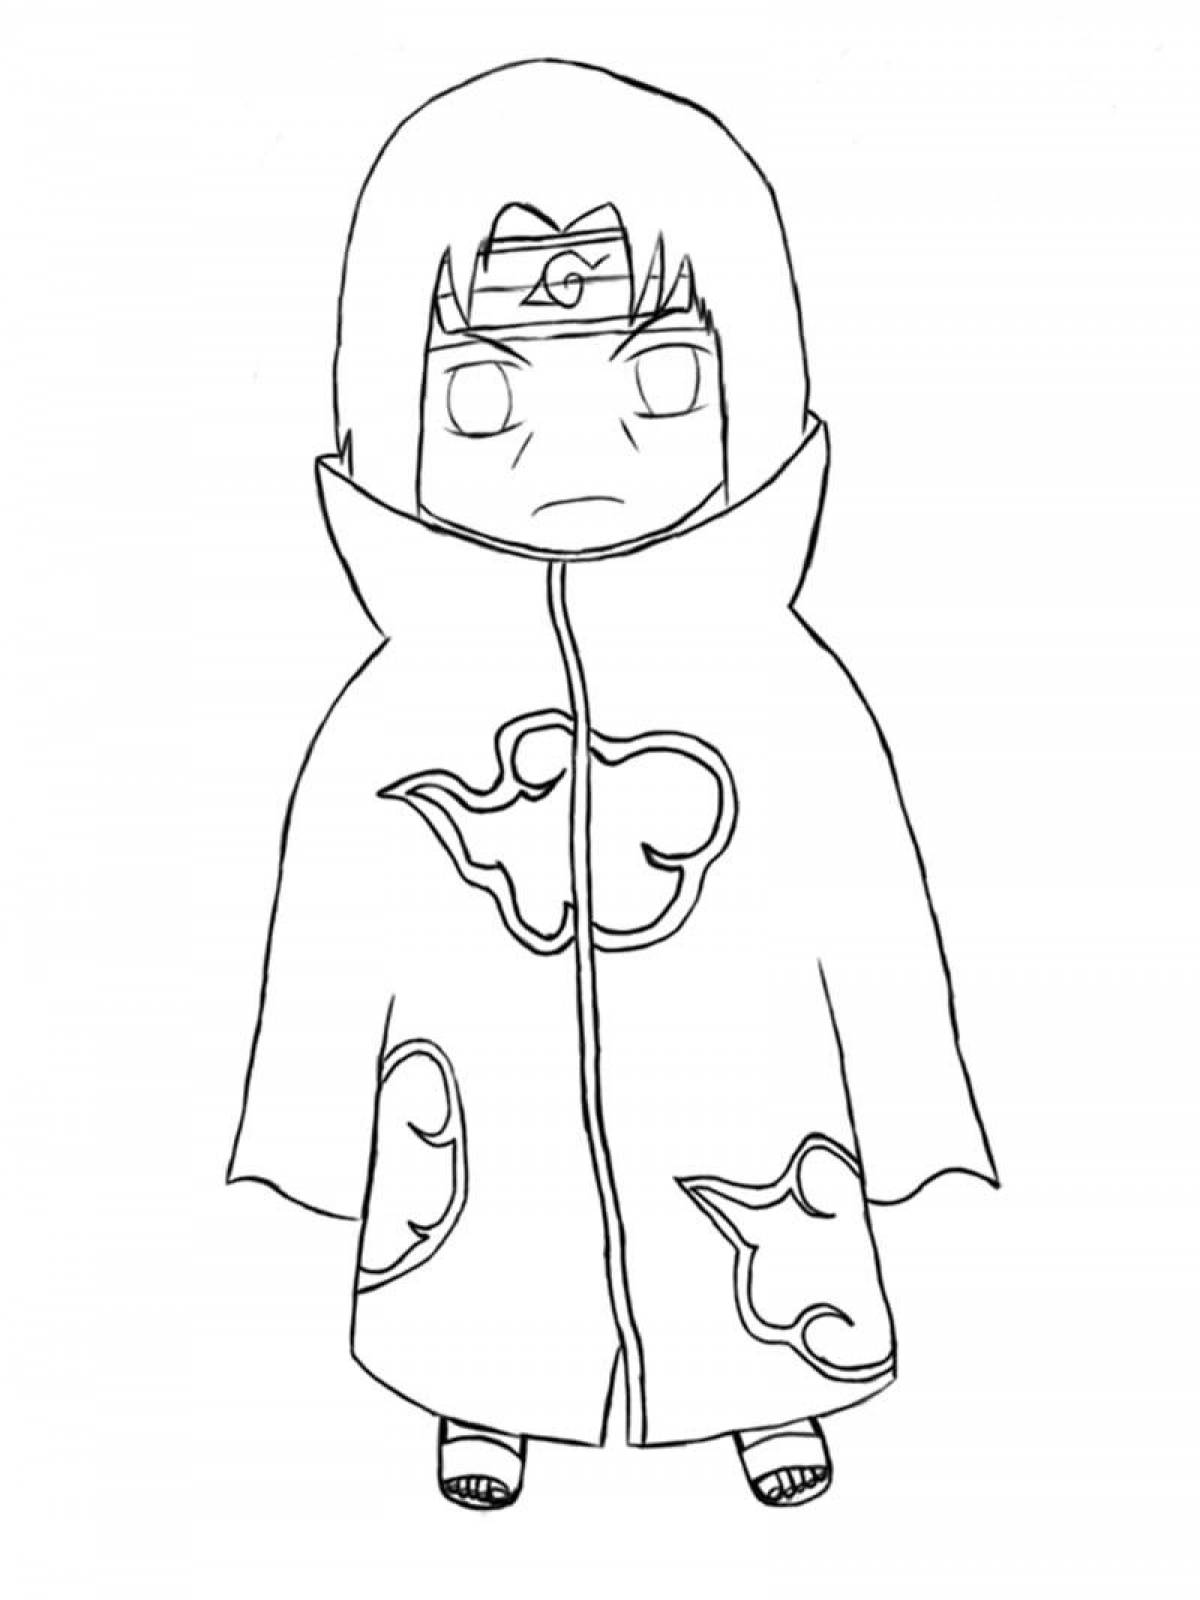 Itachi live coloring page